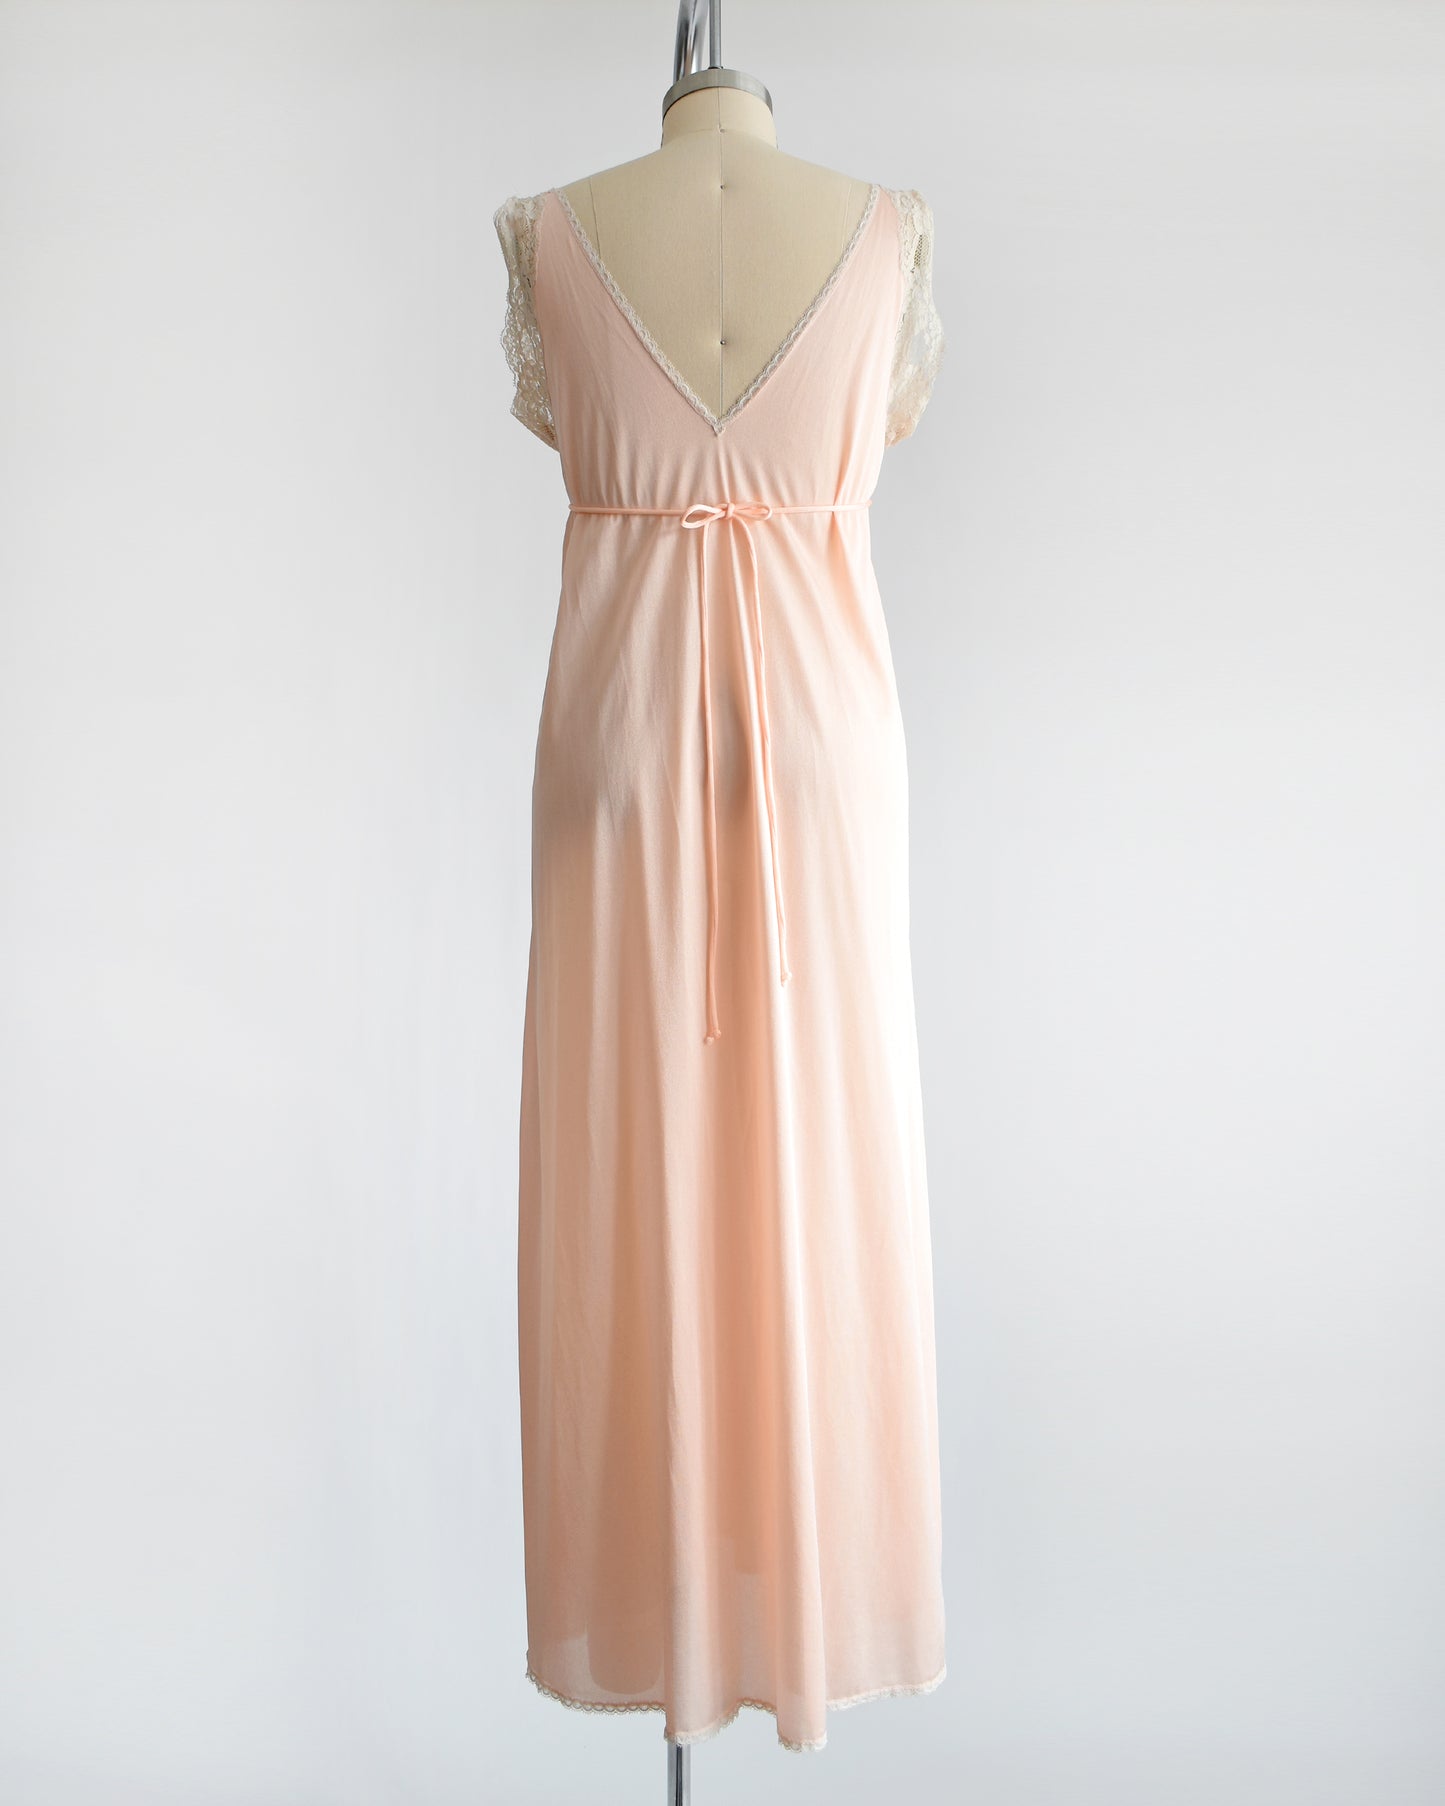 Back view of a vintage 1970s peach nightgown with lace trim